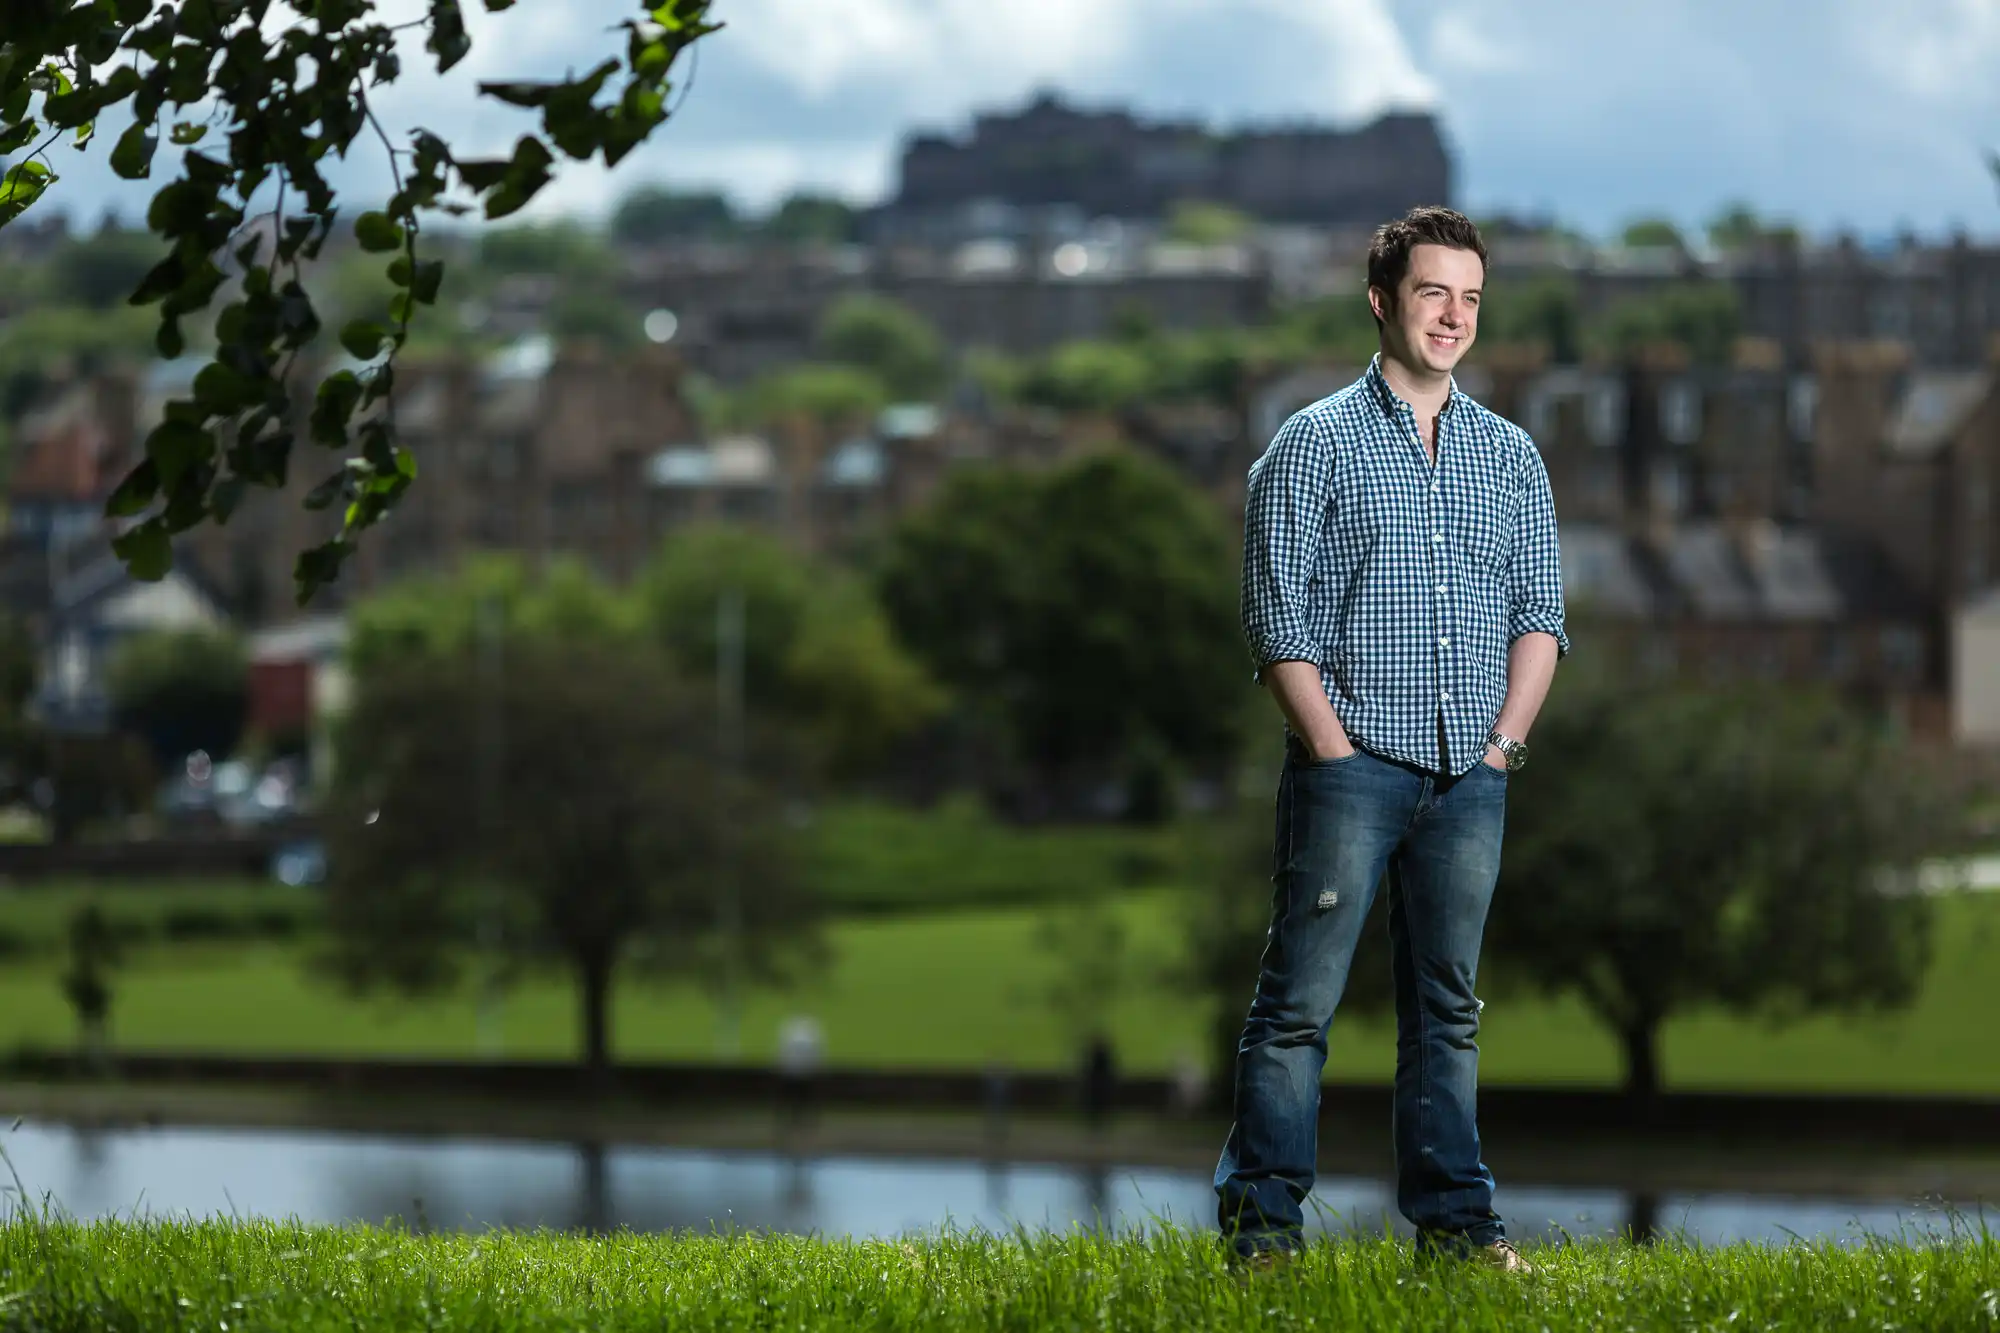 Young man standing in a park with the cityscape and edinburgh castle in the background on a cloudy day.